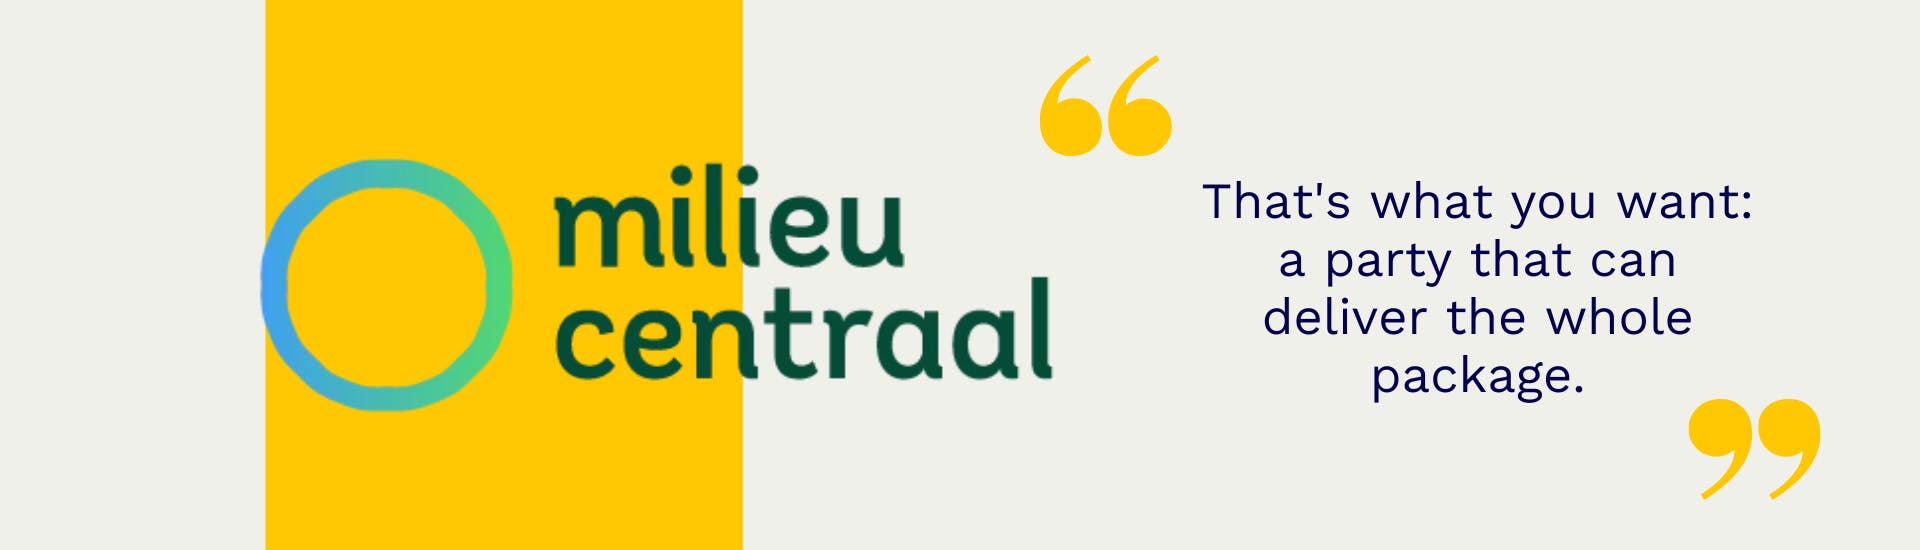 Logo Milieu Centraal with a yellow surface behind it. To the right of it it says between yellow quotes: That's what you want: a party that can deliver the whole package.